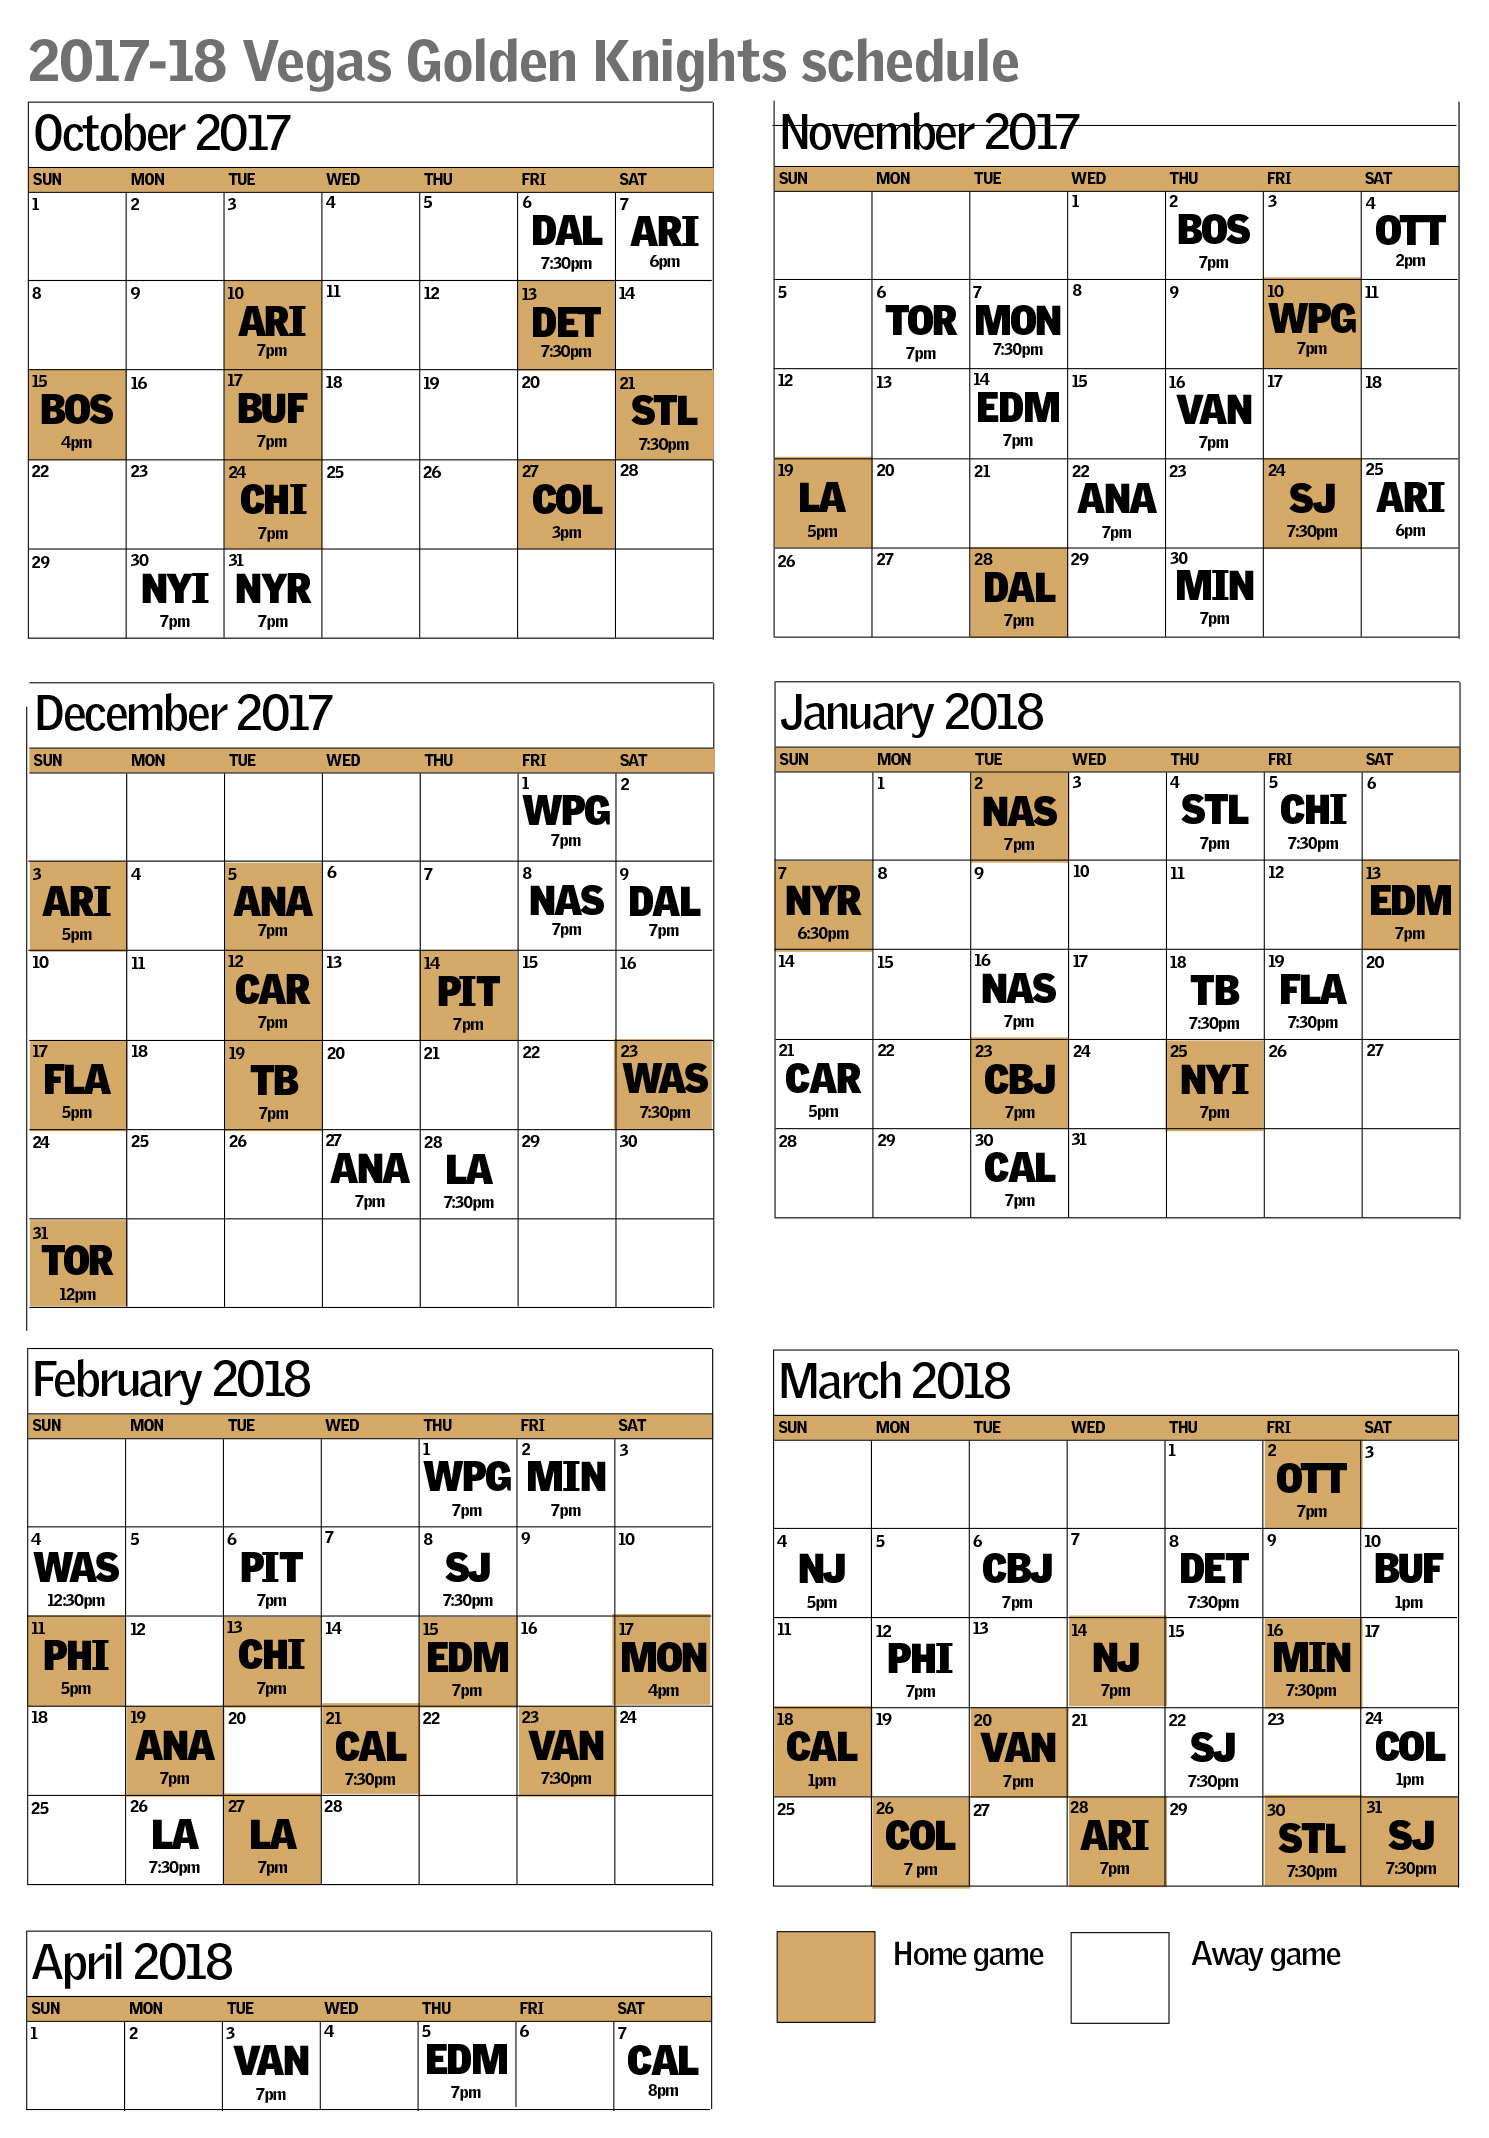 Vegas Golden Knights Schedule Includes Early 7 game 